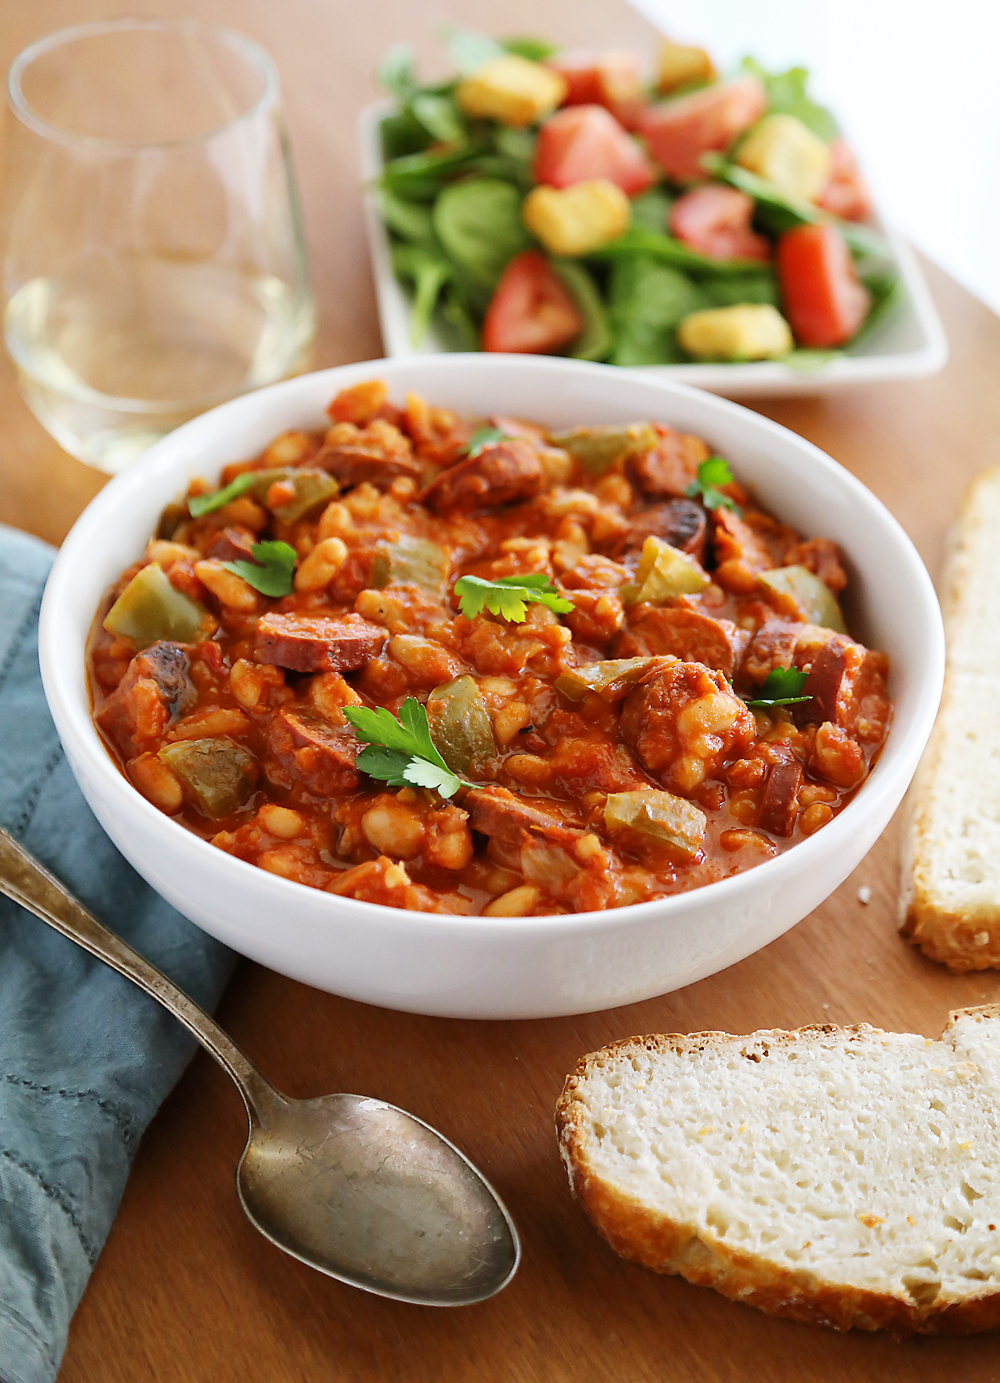 Slow Cooker Sausage, Peppers and White Beans – Hearty, healthy 6-ingredient/one-pot dish in a rich tomato sauce. So easy and delish with a salad! thecomfortofcooking.com